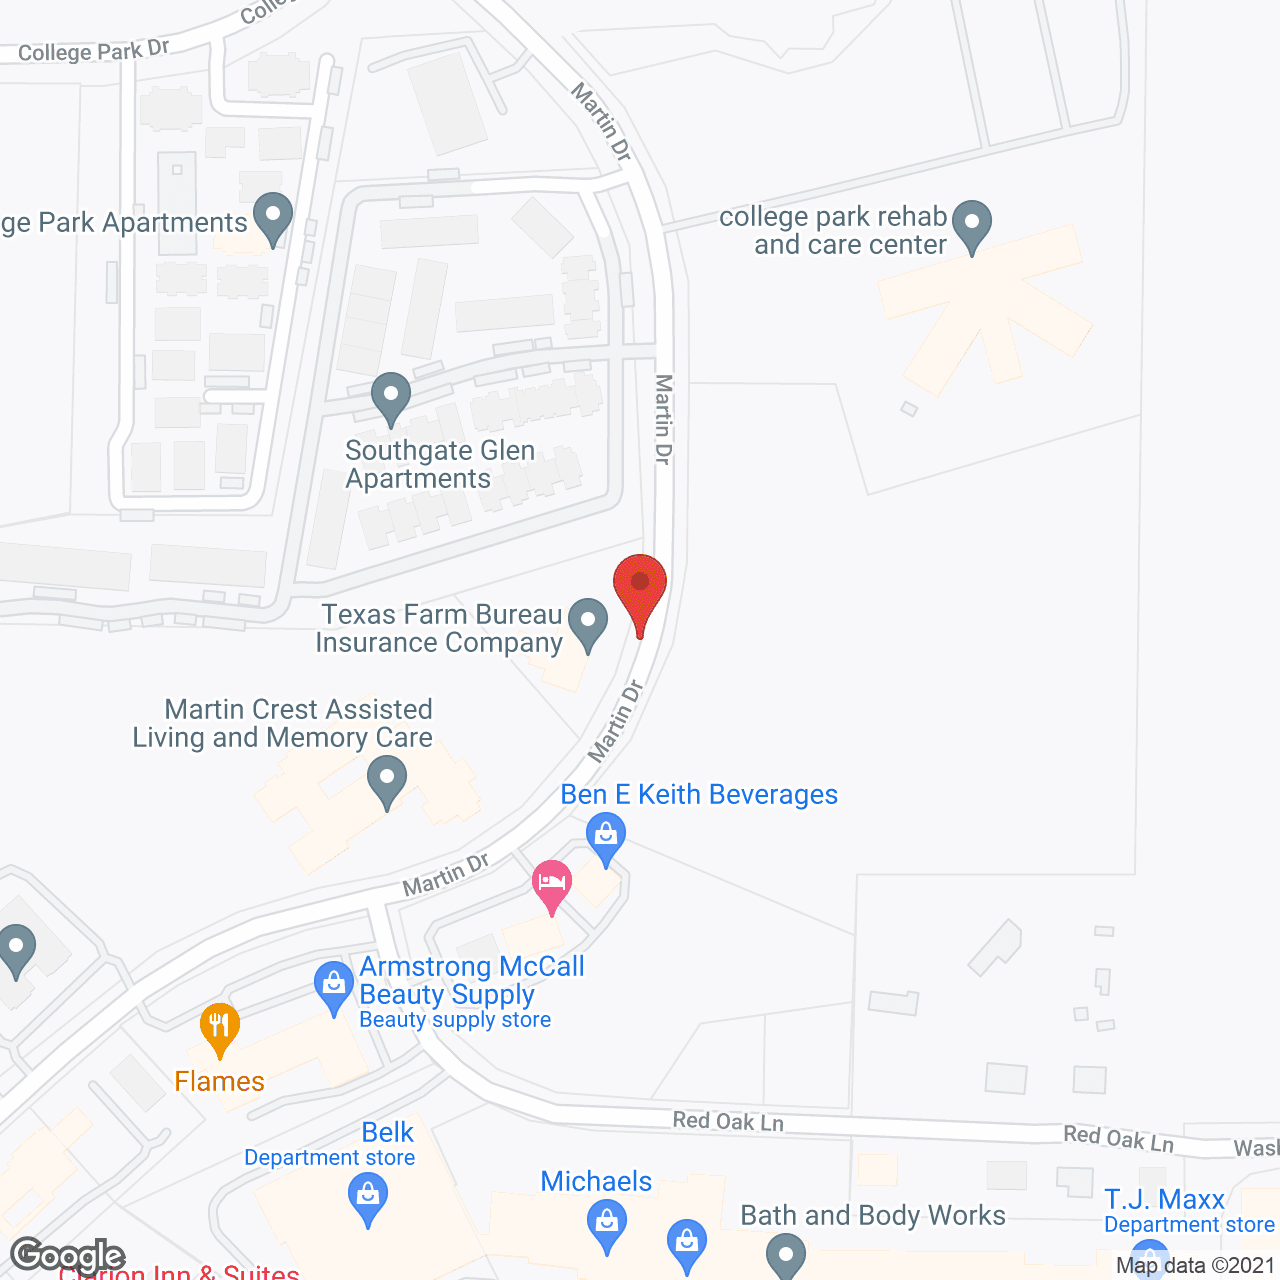 Martin Crest Assisted Living and Memory Care in google map